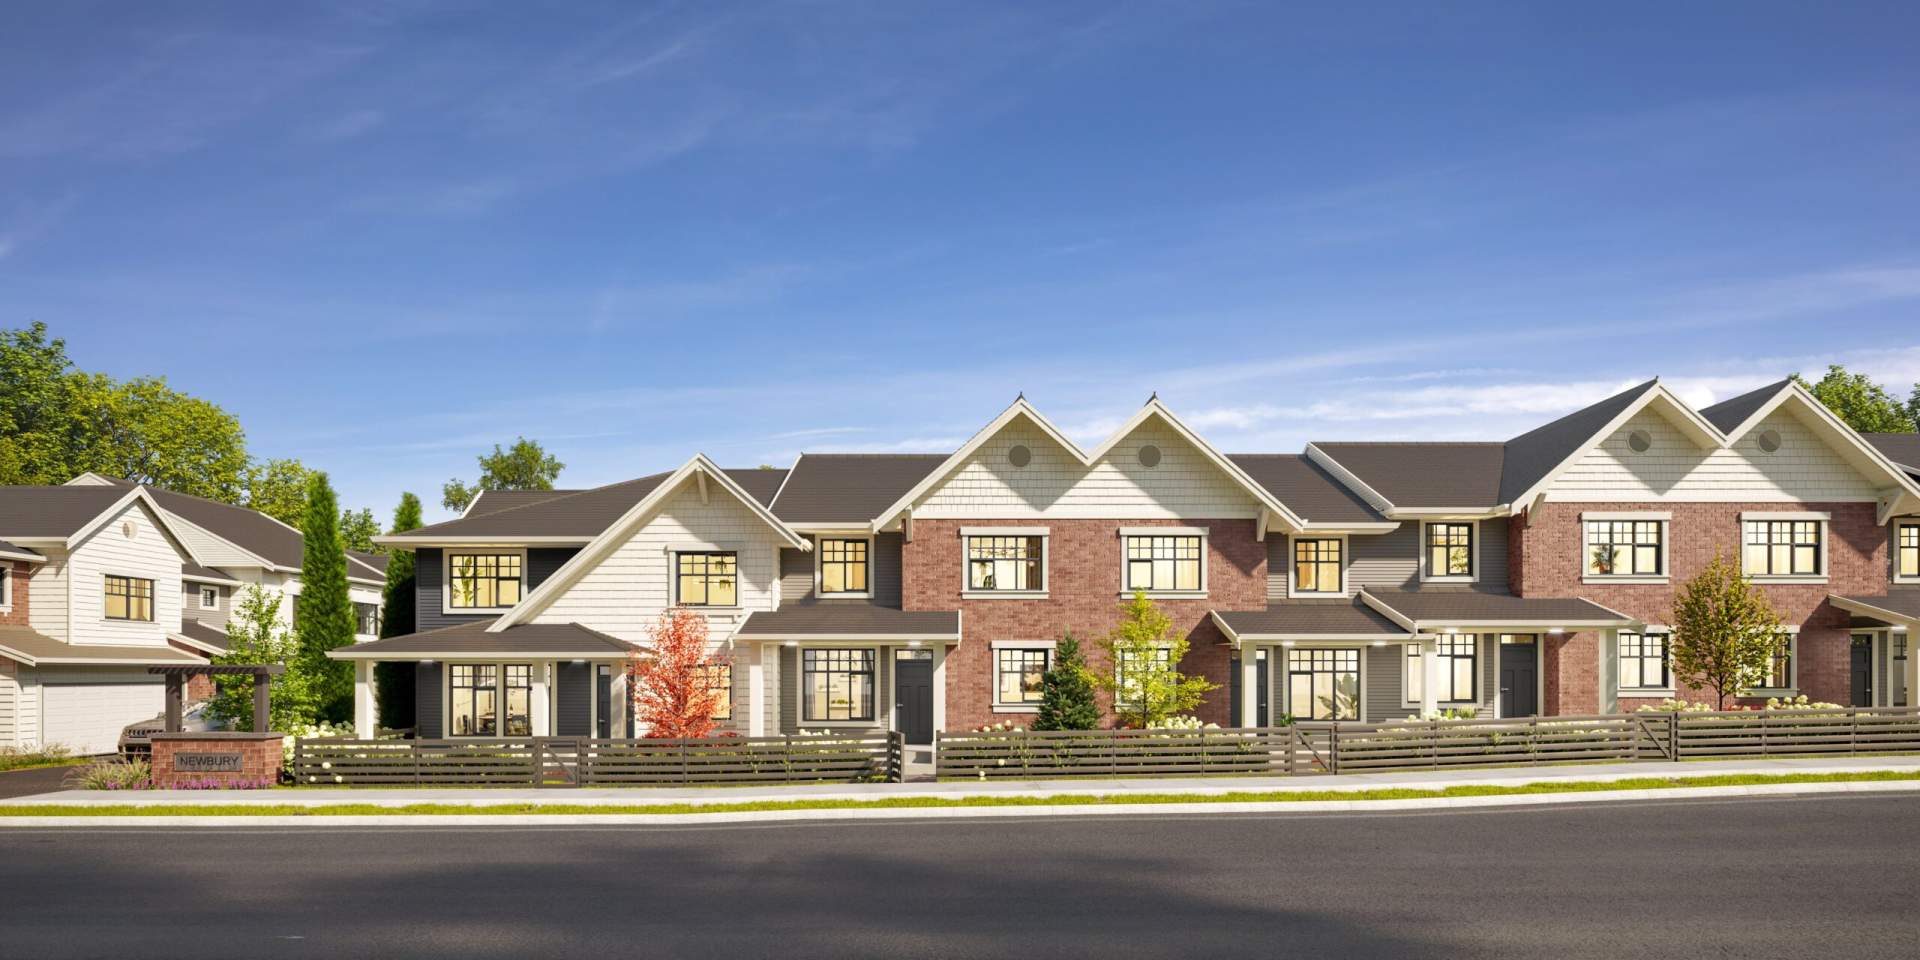 Newbury Townhomes by Zenterra – Plans, Availability, Prices